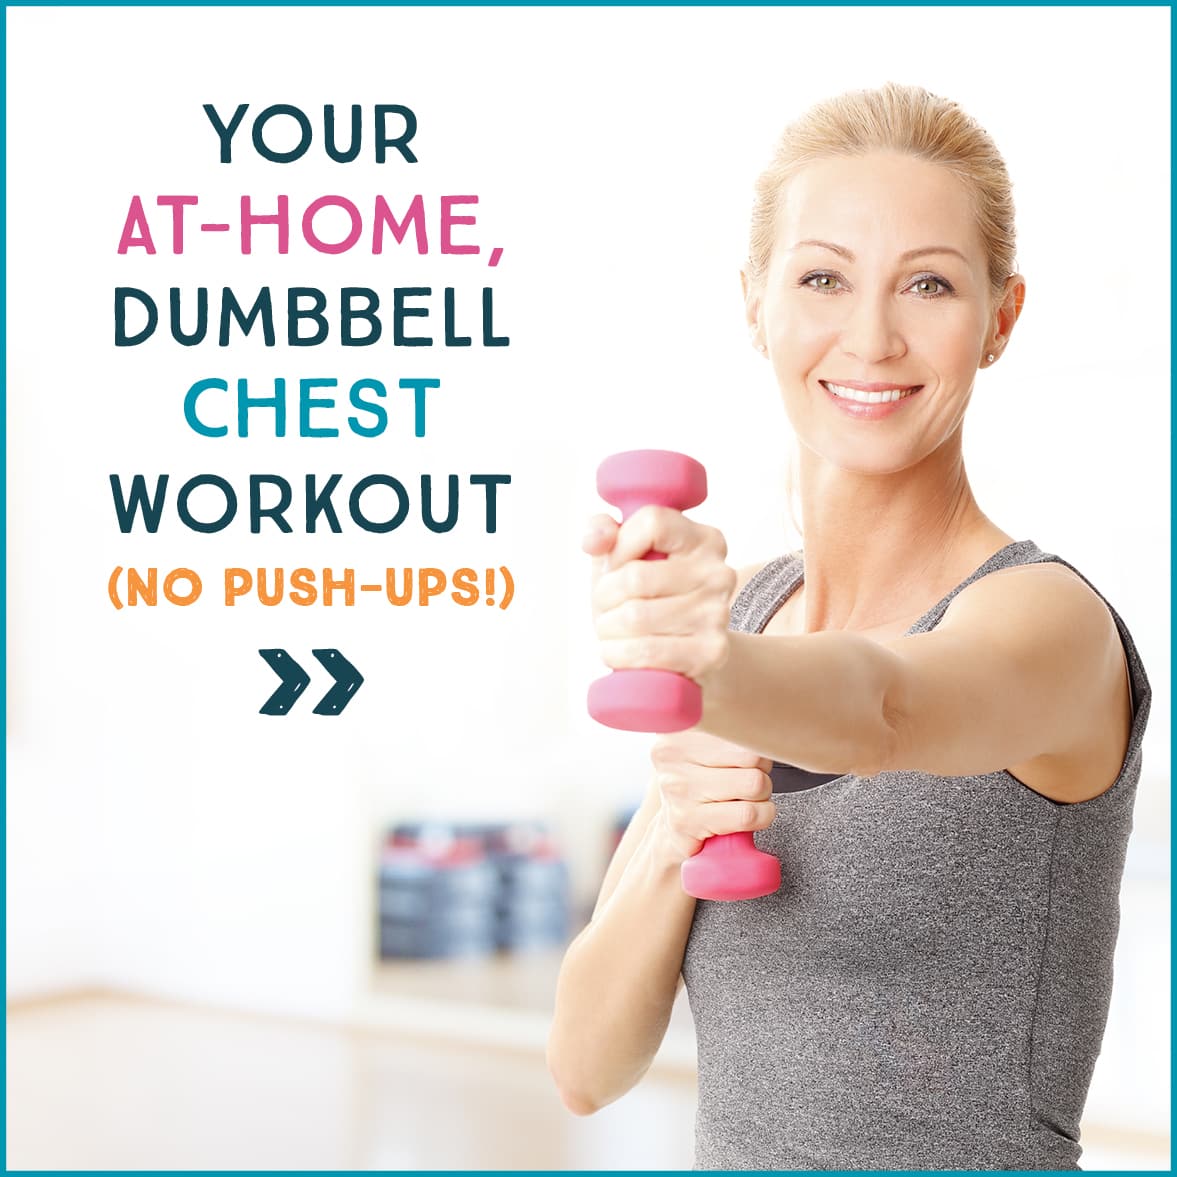 Woman holding dumbbells in living room with text "Your At-Home, Dumbbell Chest Workout (No Push-Ups!)"